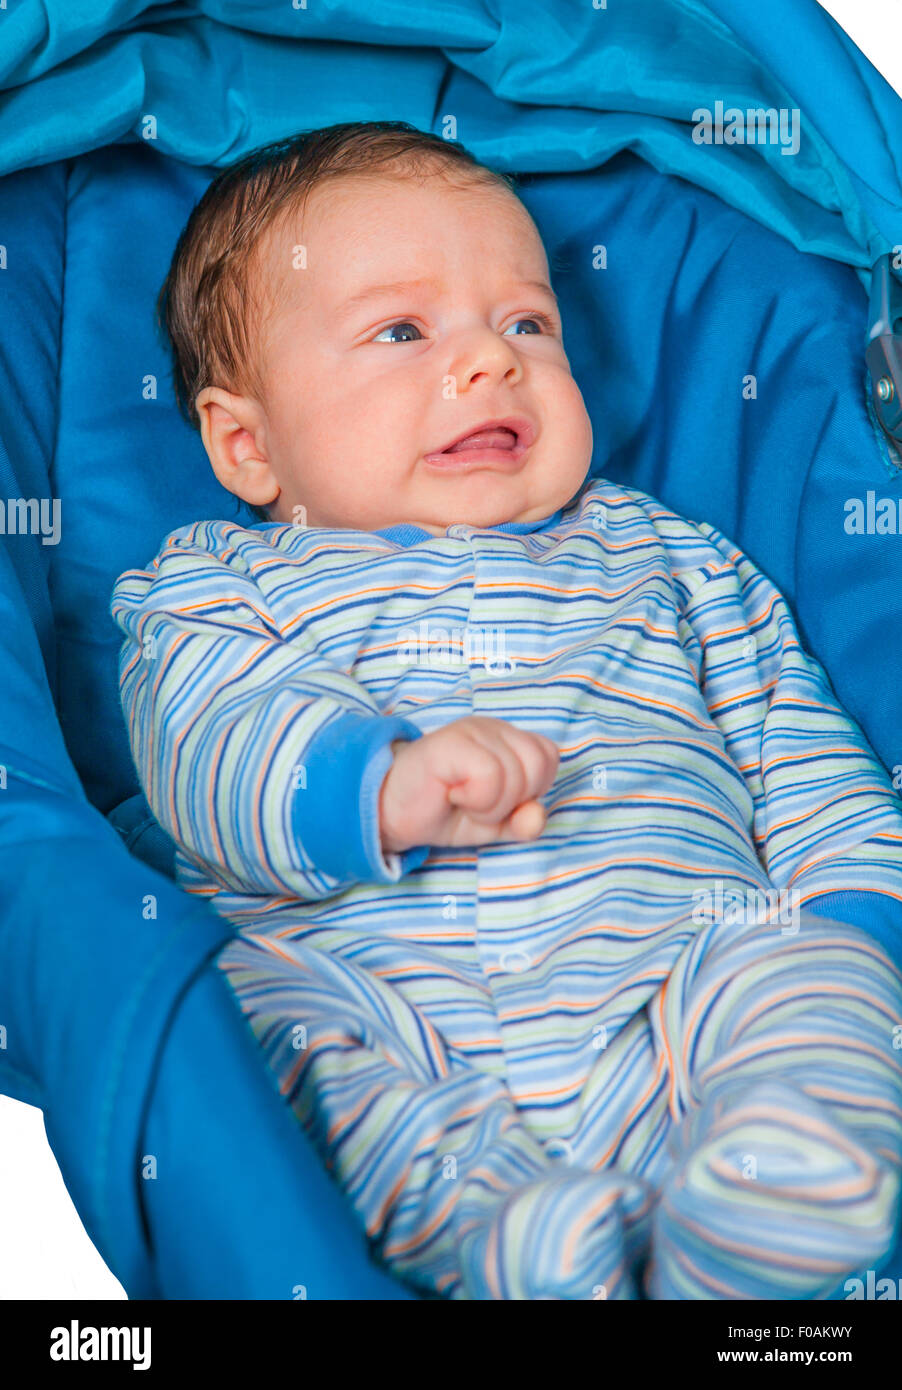 Portrait Of A 2 Months Old Baby Boy Sitting In A Safety Seat Stock Photo Alamy